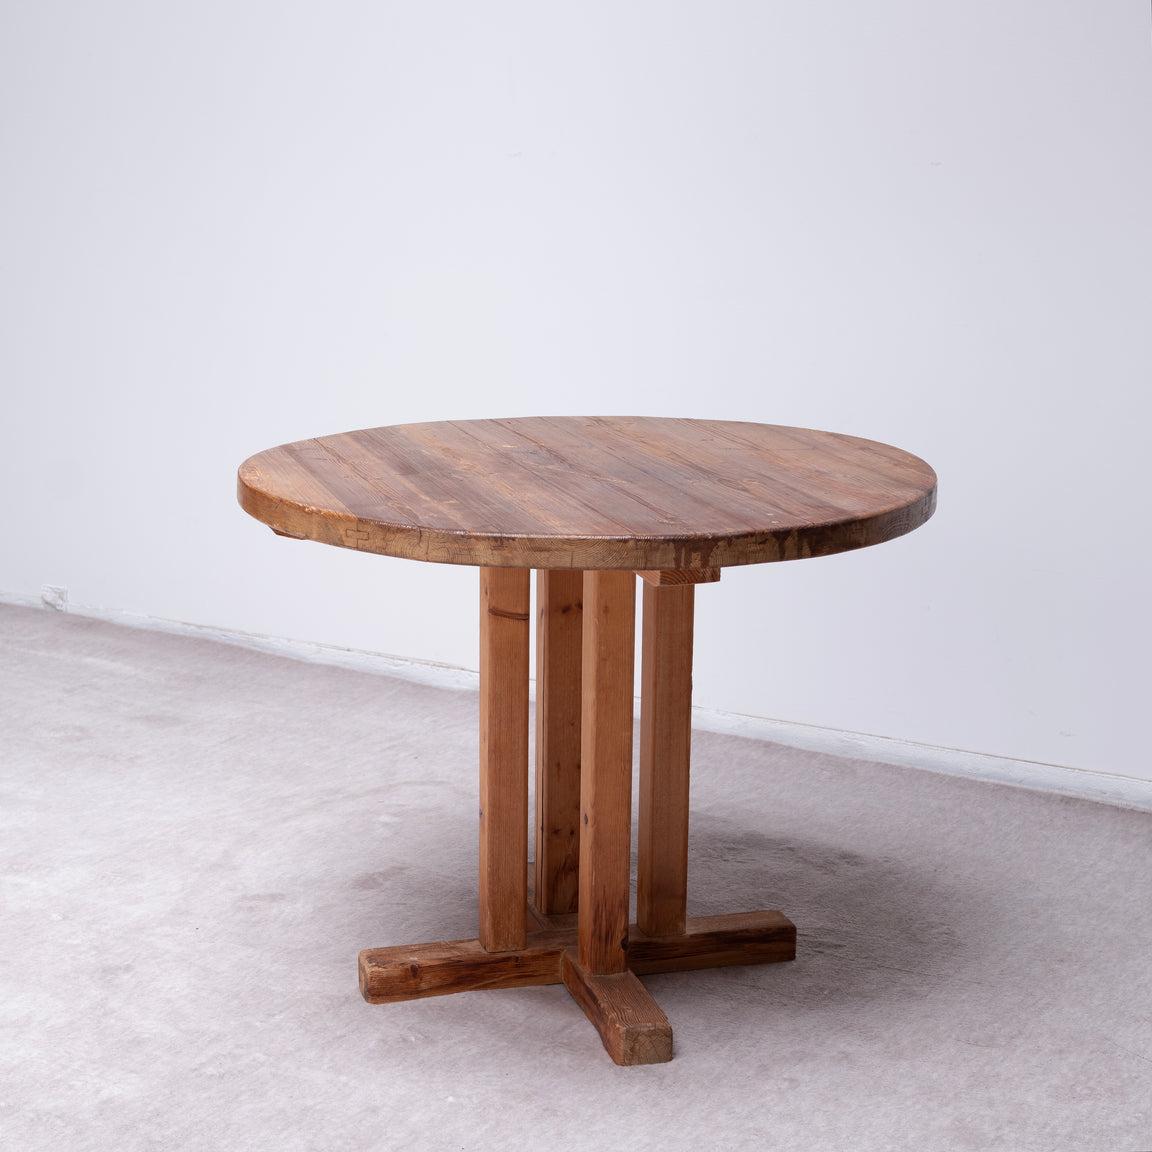 Vintage round dining table from Meribel that is known as the project that Charlotte Perriand did. 1960s.

